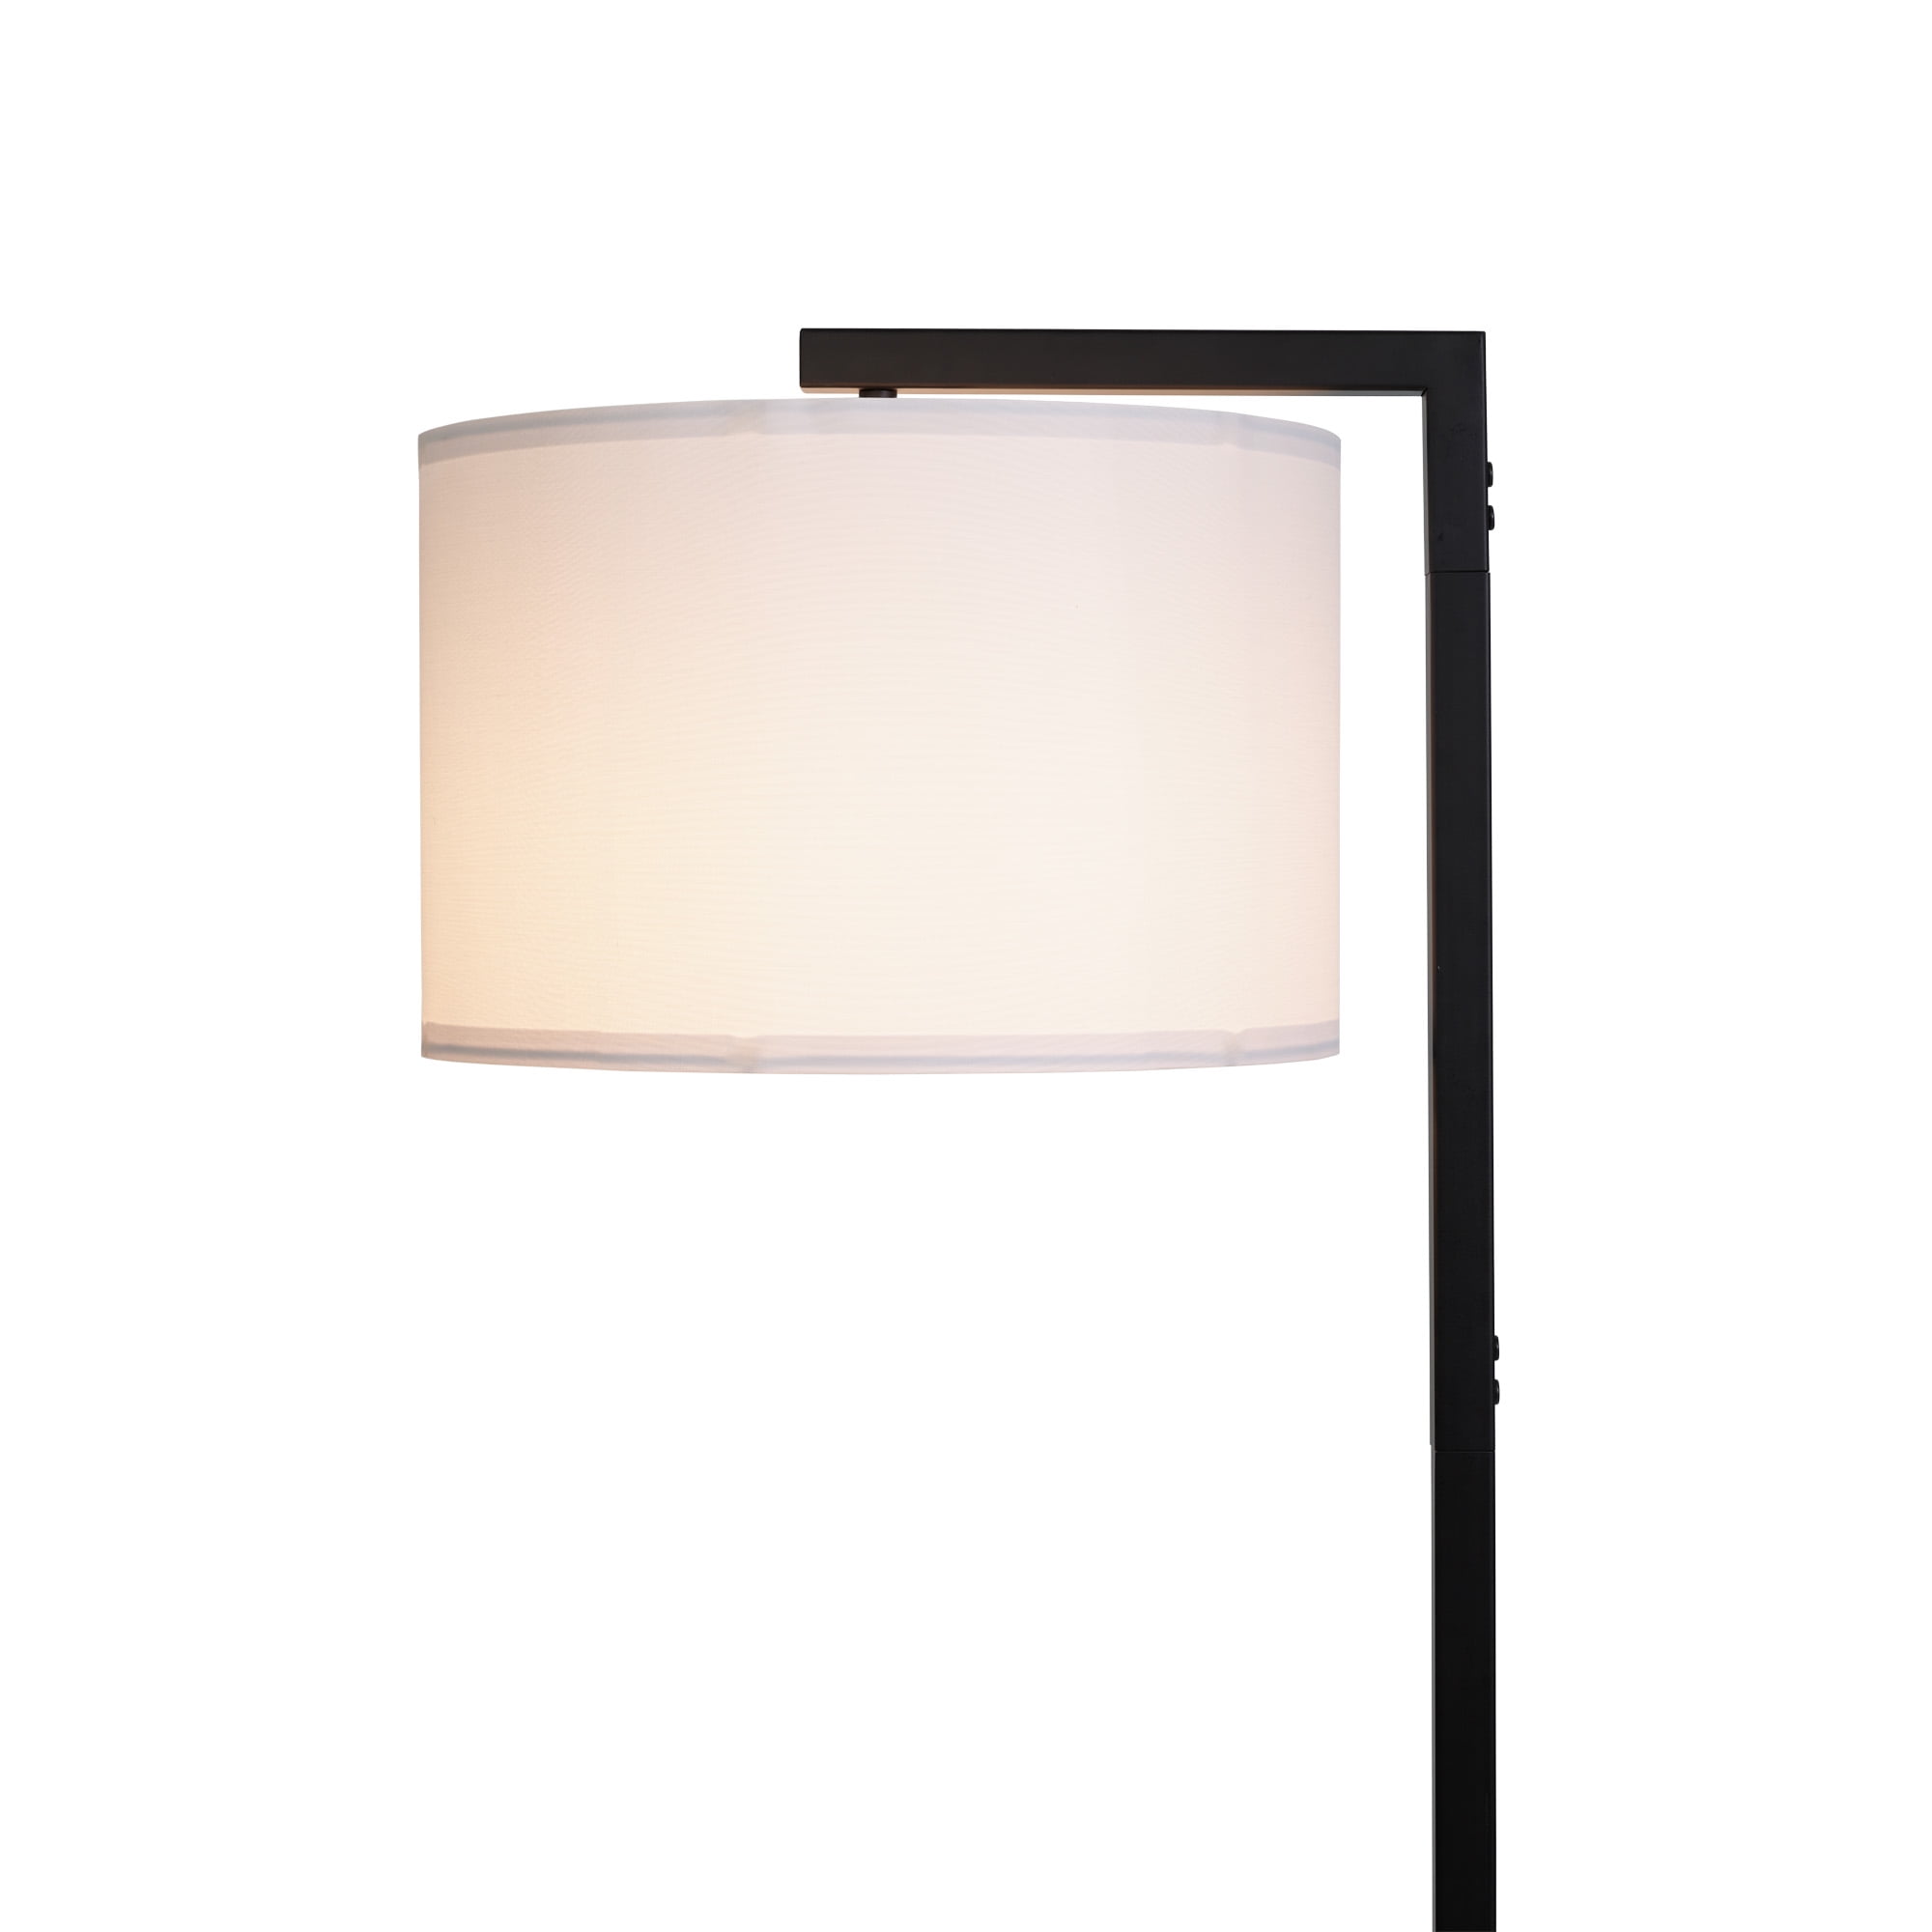 Mainstays Contemporary Metal 62in Floor Lamp with on/off Foot Switch, Black - 3